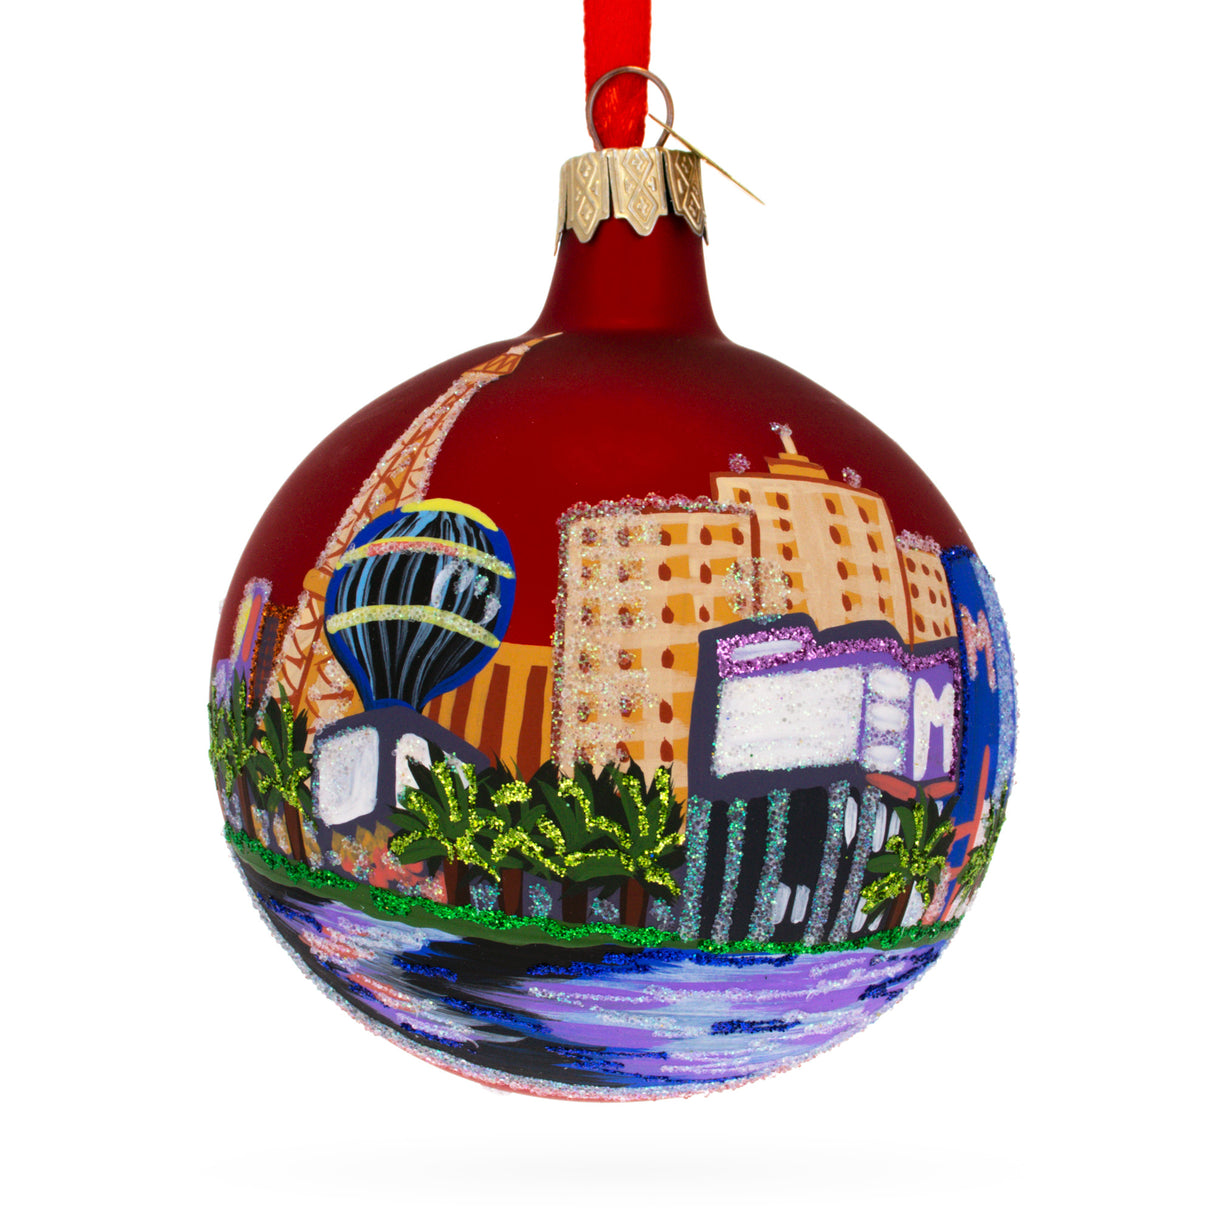 Las Vegas, Nevada Glass Ball Christmas Ornament 3.25 Inches in Red color, Round shape